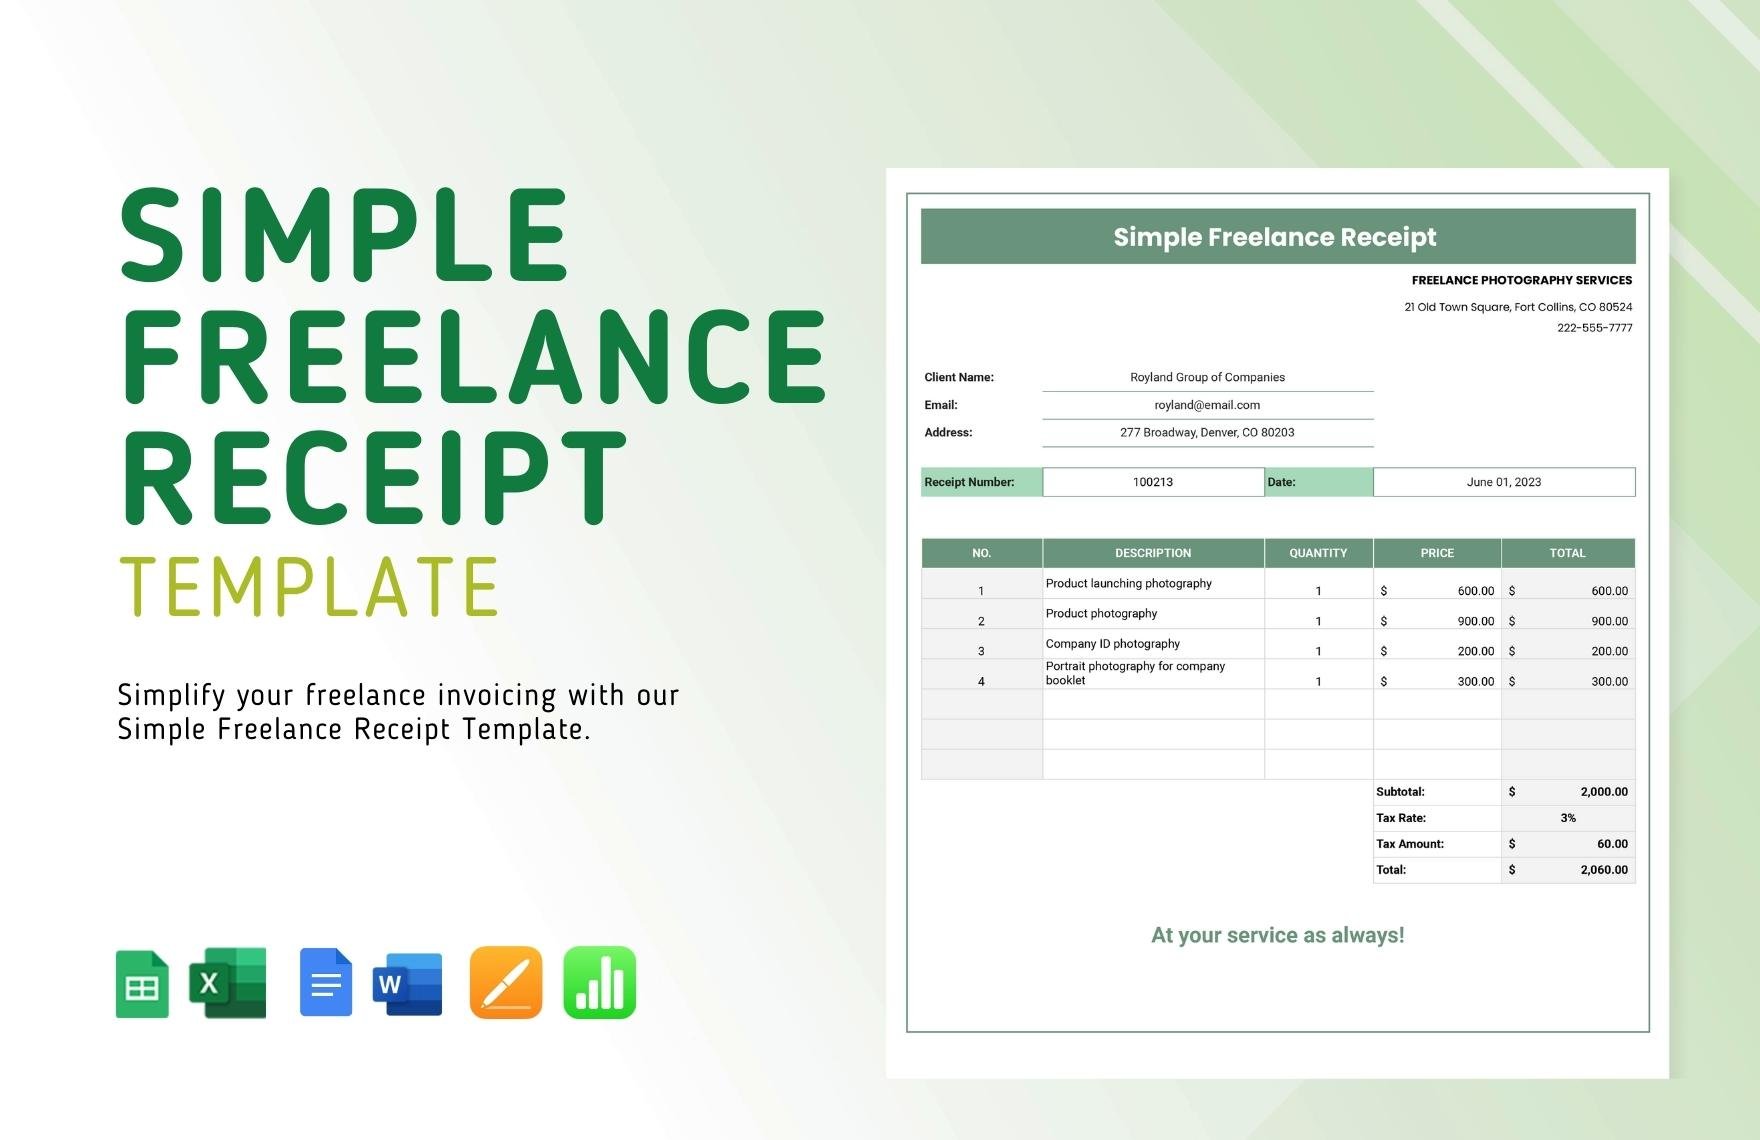 Simple Freelance Receipt Template in Word, Google Docs, Excel, Google Sheets, Apple Pages, Apple Numbers